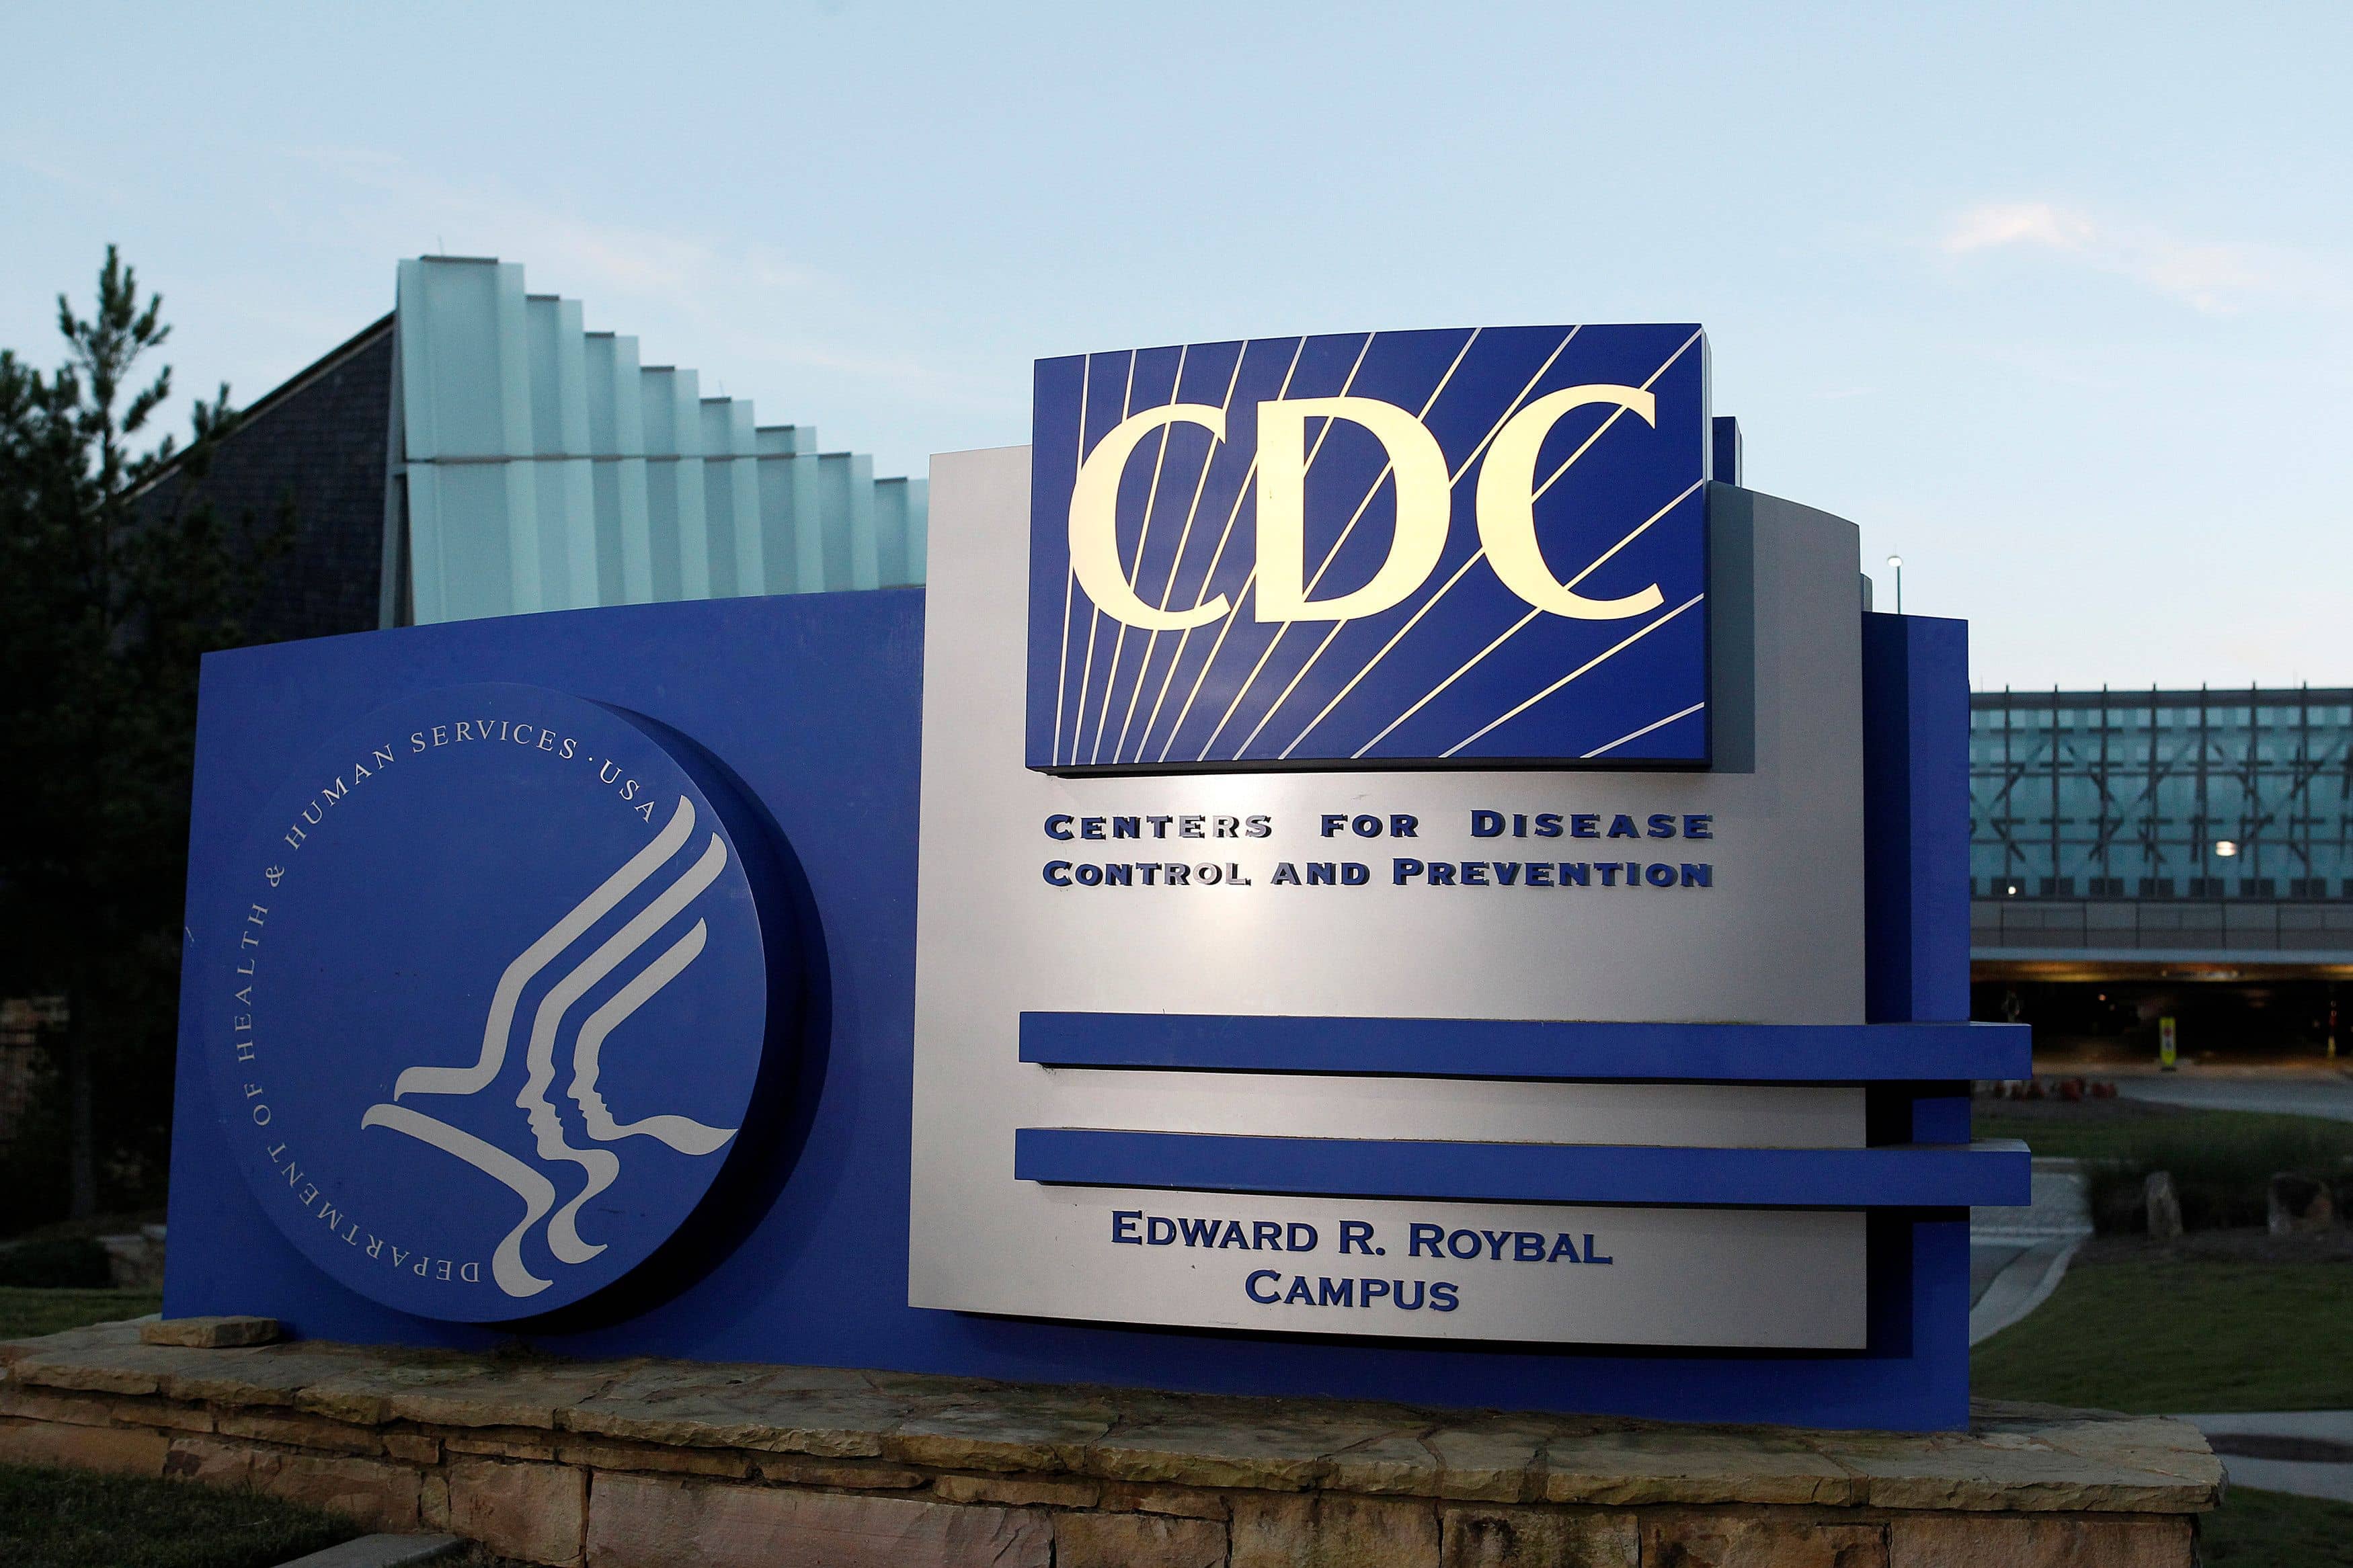 file-photo-a-general-view-of-centers-for-disease-control-and-prevention-cdc-headquarters-in-atlanta